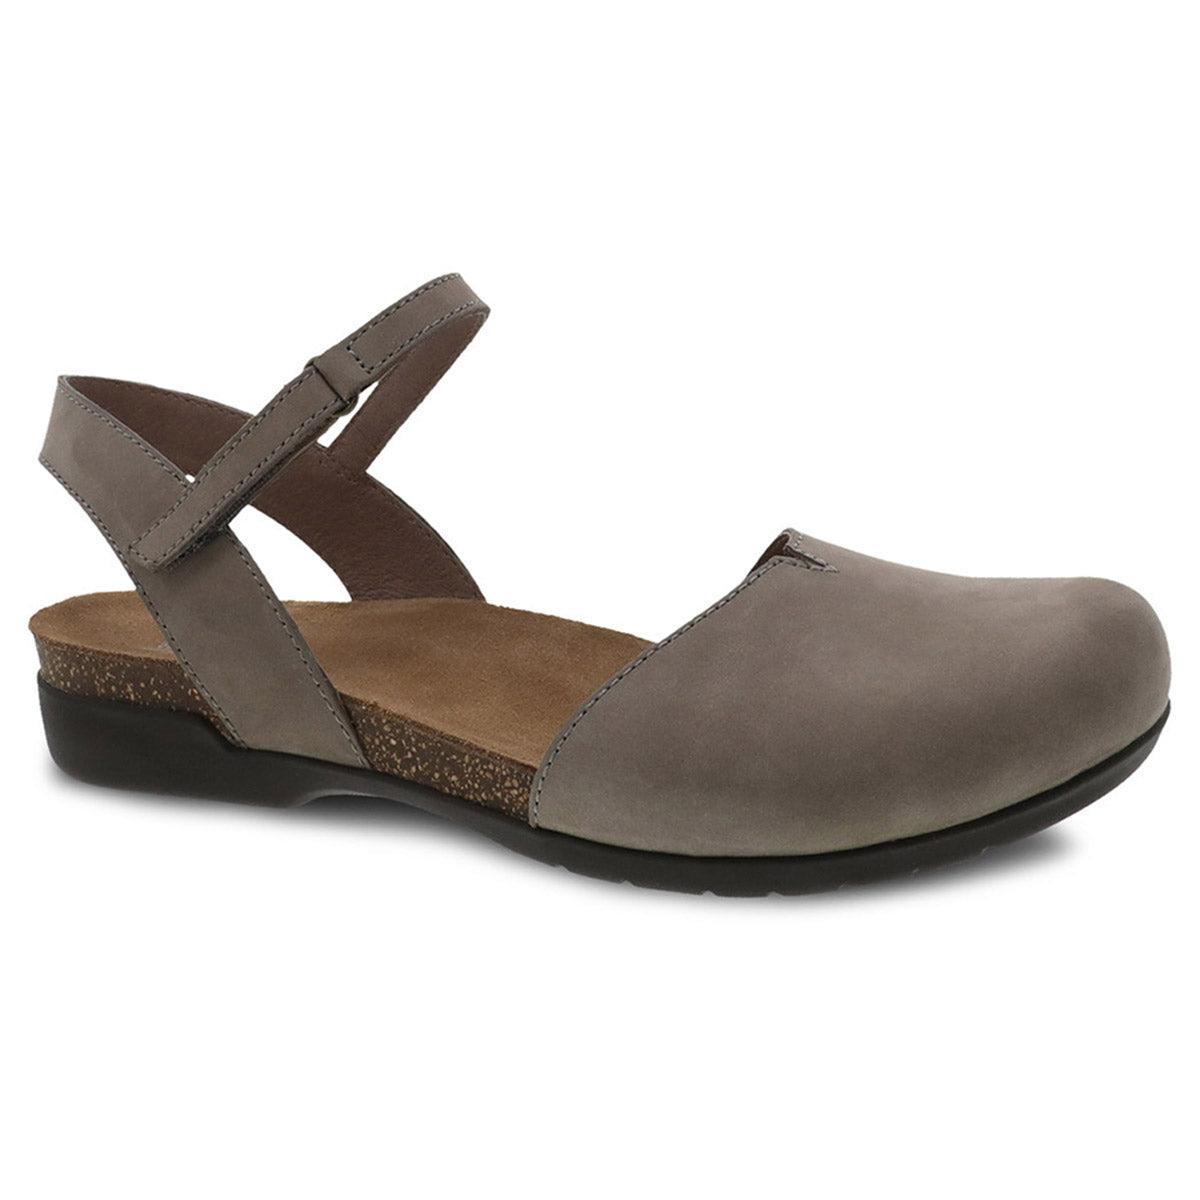 Women's Dansko Rowan Taupe casual leather sandal with an ankle strap on a white background.